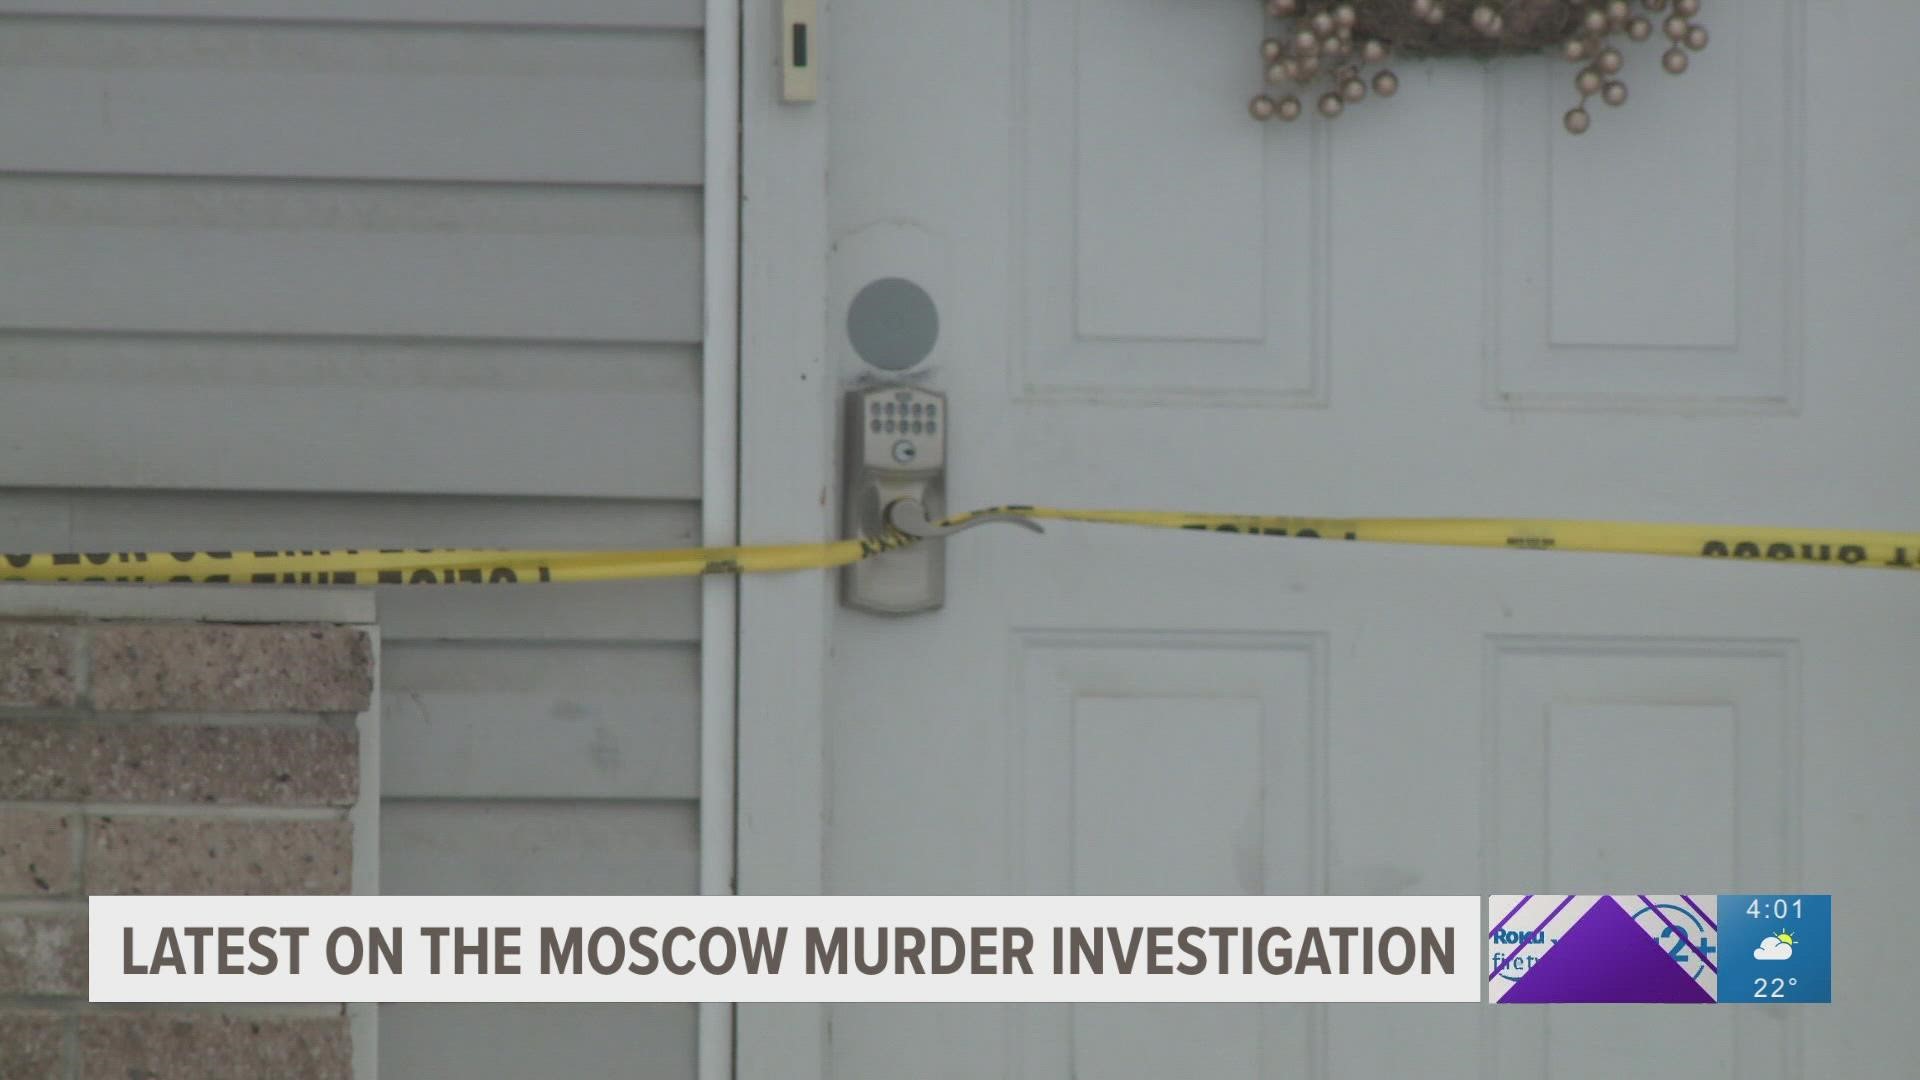 Moscow Police believe the sixth person listed on the rental lease is not involved in the murders of the four University of Idaho students.